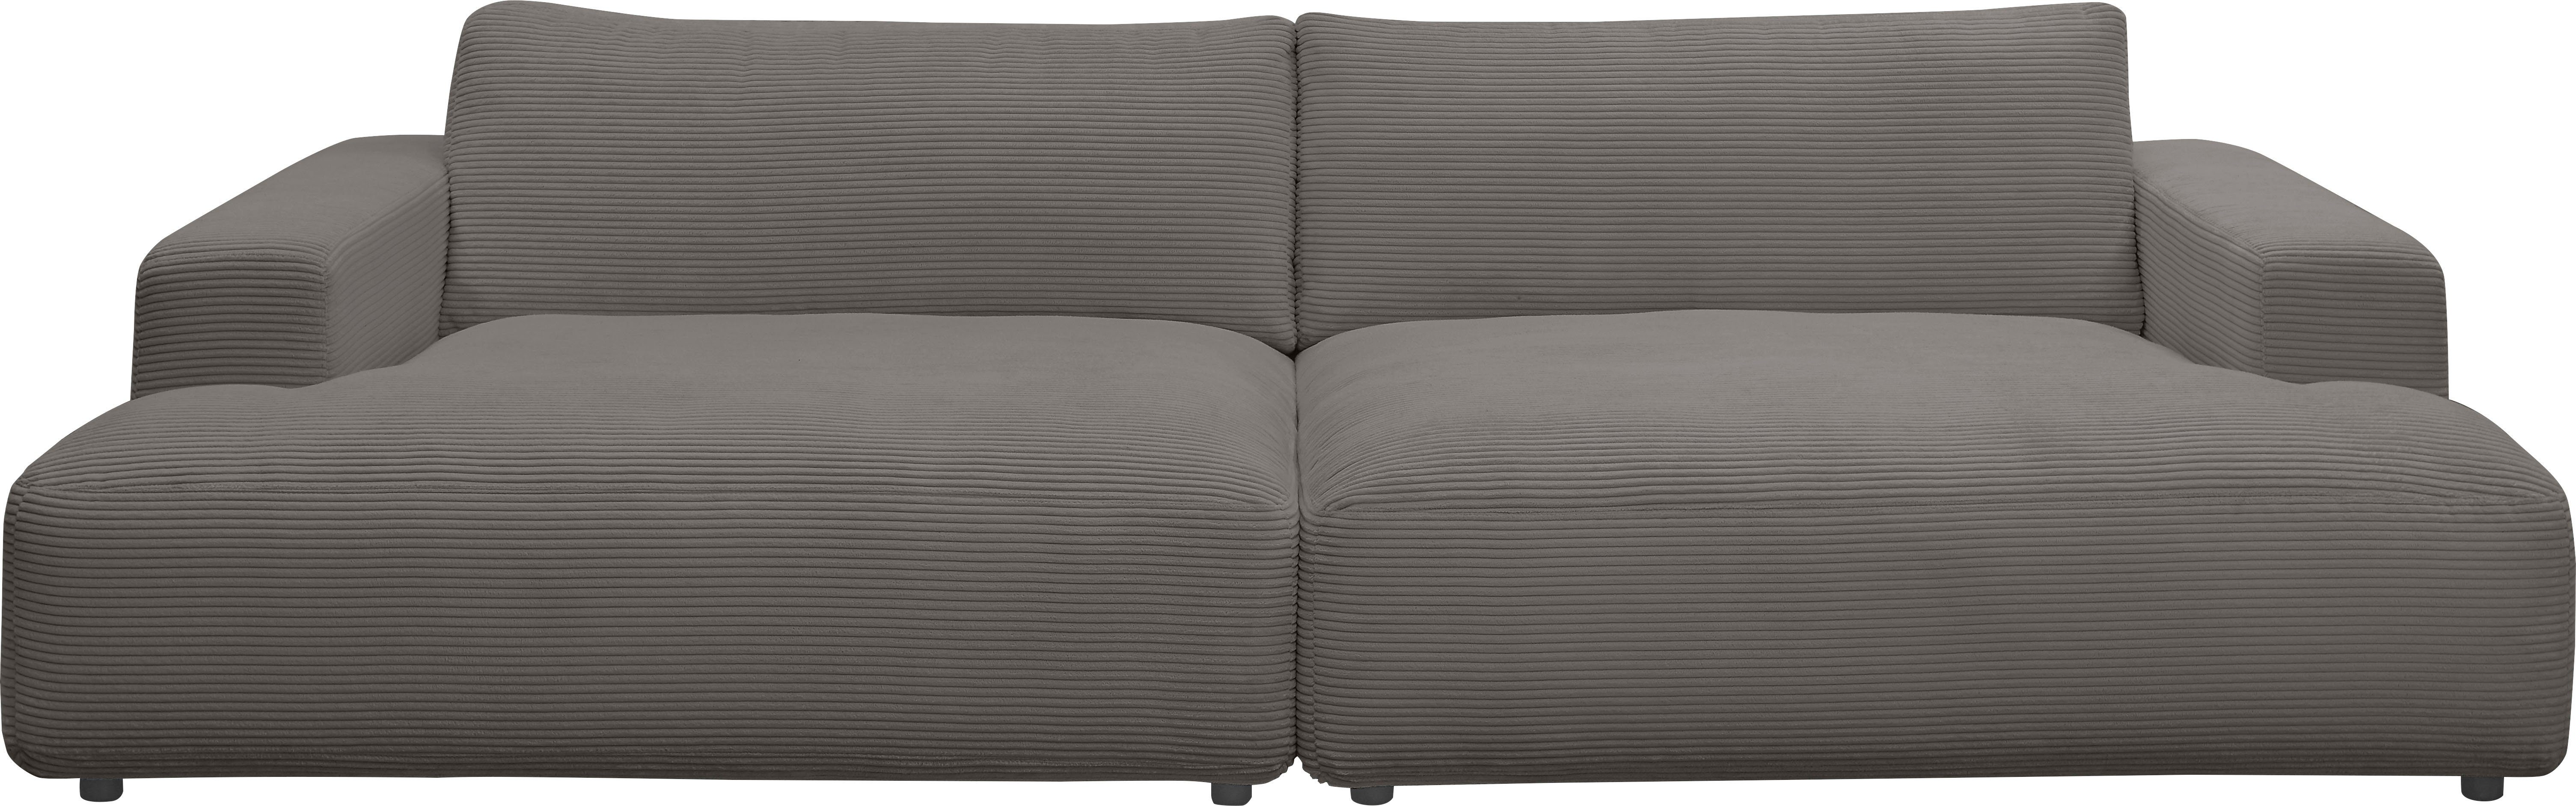 GALLERY M branded by Musterring Loungesofa Lucia, Cord-Bezug, Breite 292 cm dark-grey | Alle Sofas